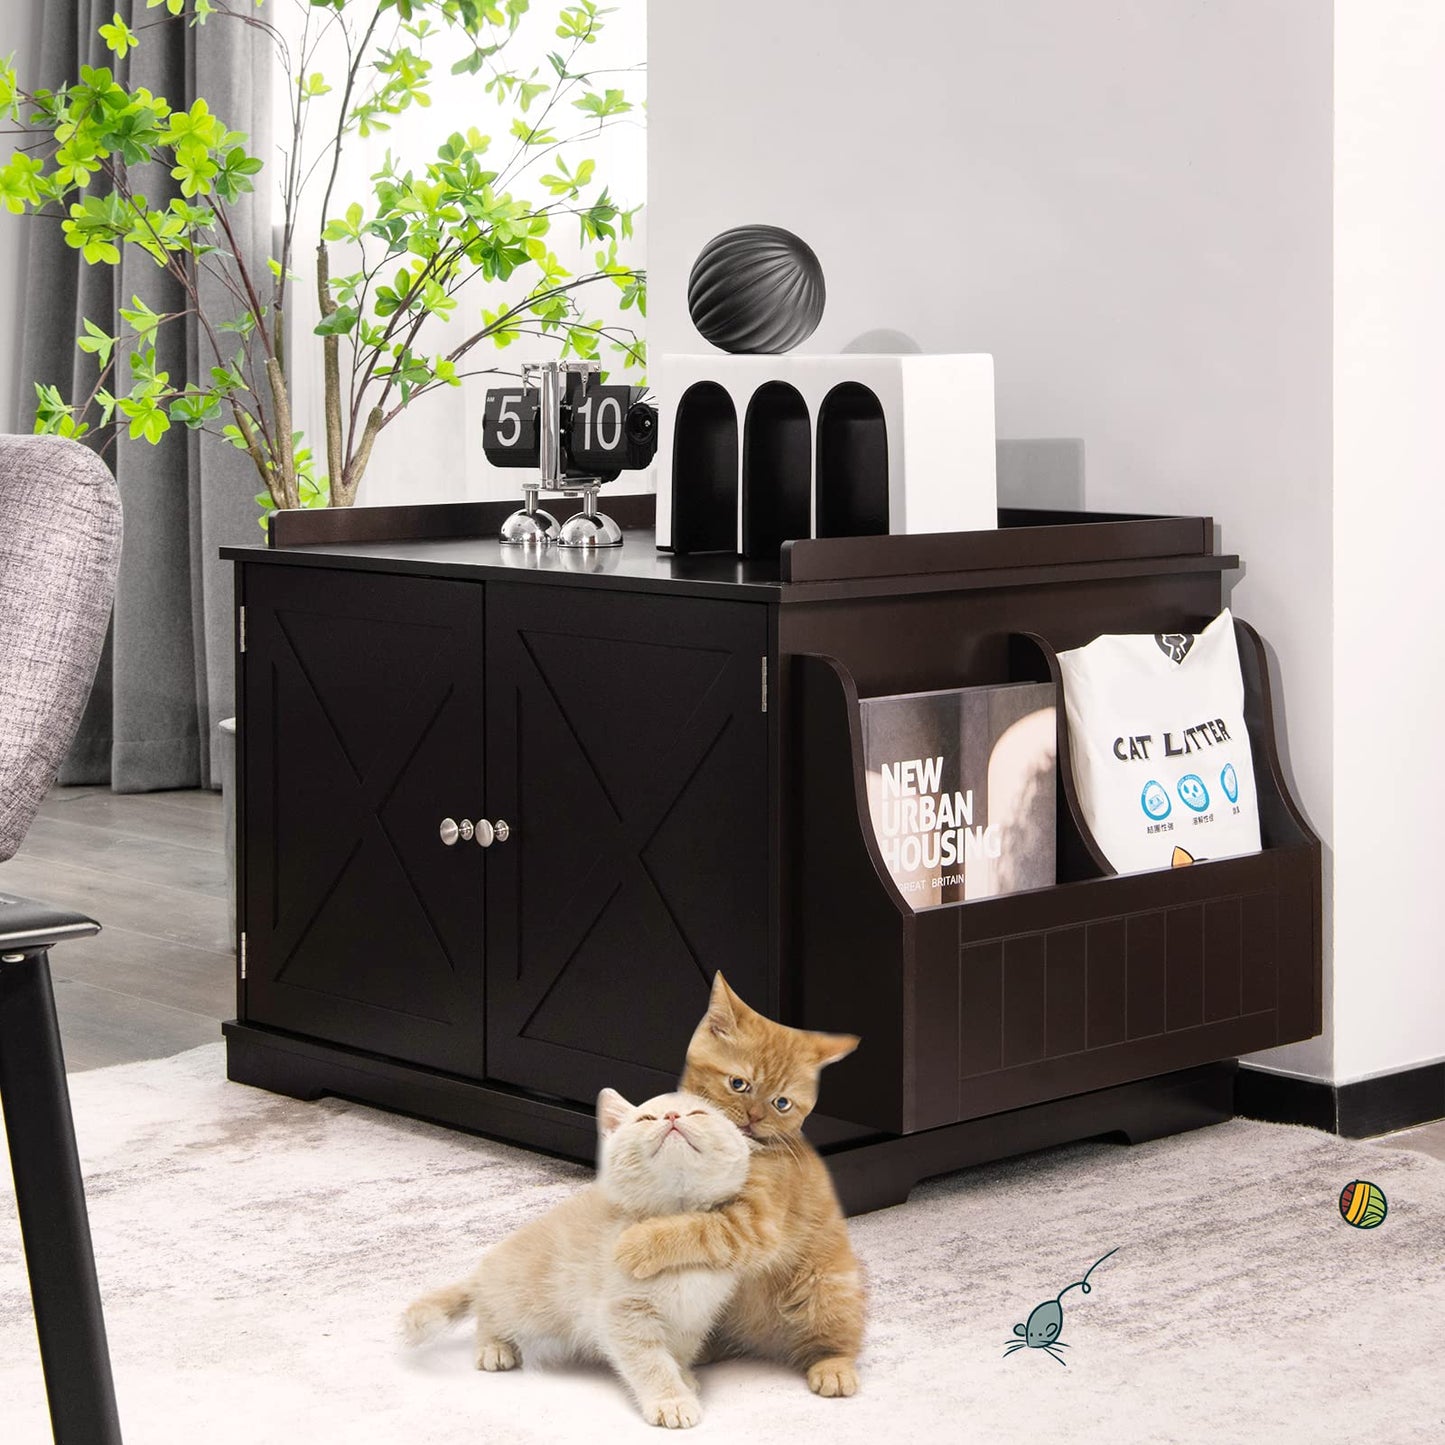 Tangkula Cat Litter Box Enclosure, Wooden Cat House Side Table w/Removable Divider, Reversible Entrance, Magazine Rack, Large Nightstand Pet House, Hidden Cat Washroom, Litter Box Furniture (Brown)